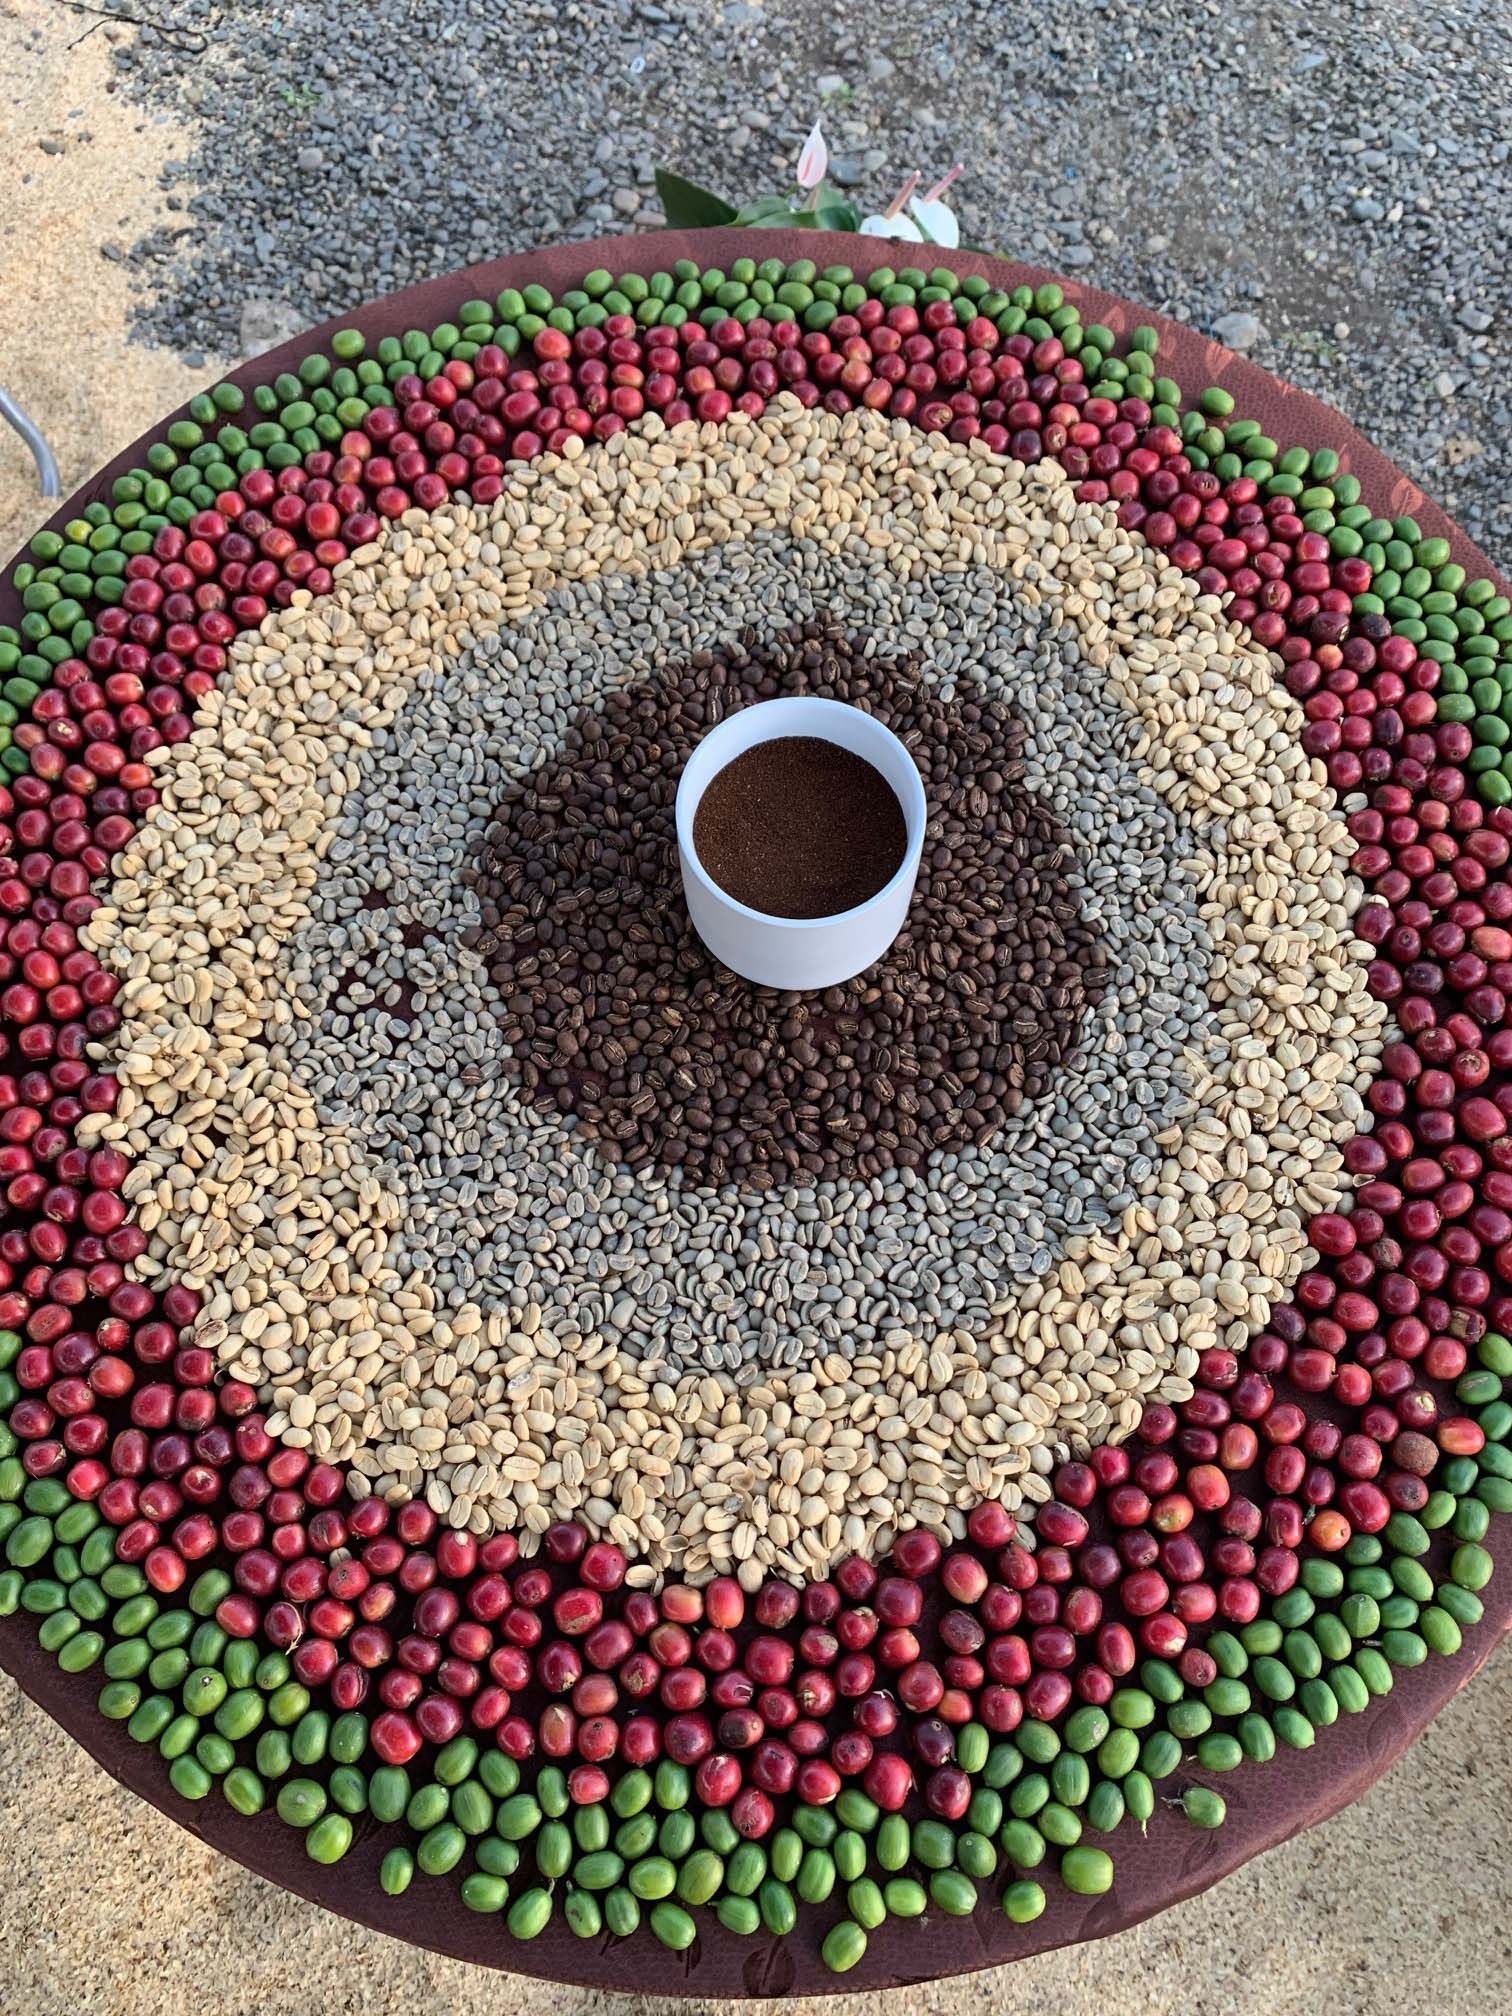 Display of coffee beans through lifecycle